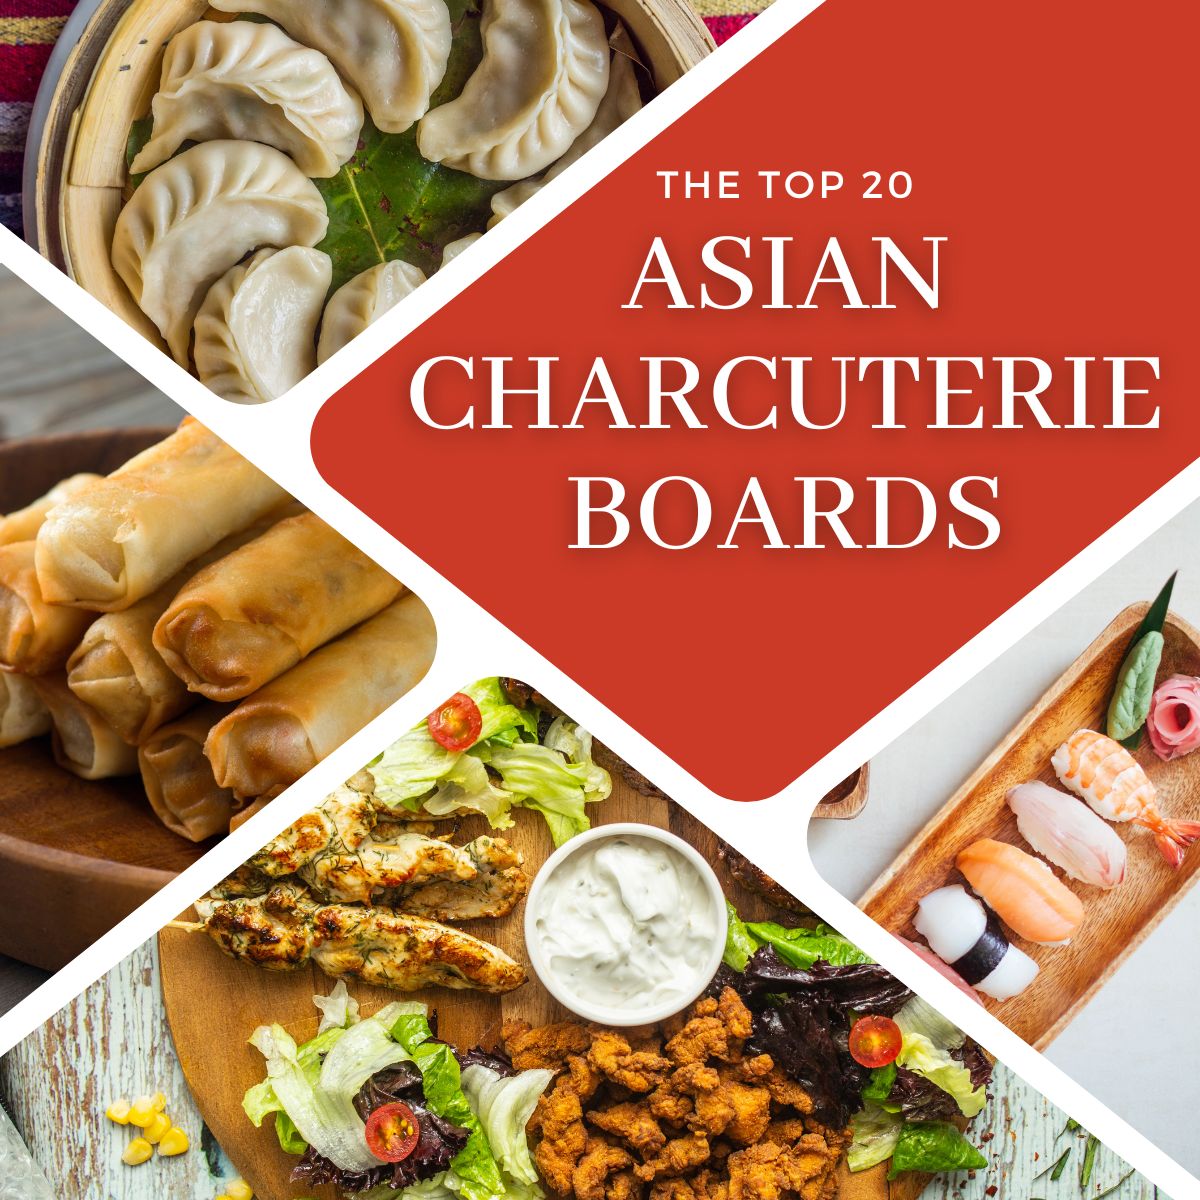 graphic design image showing various asian charcuterie board